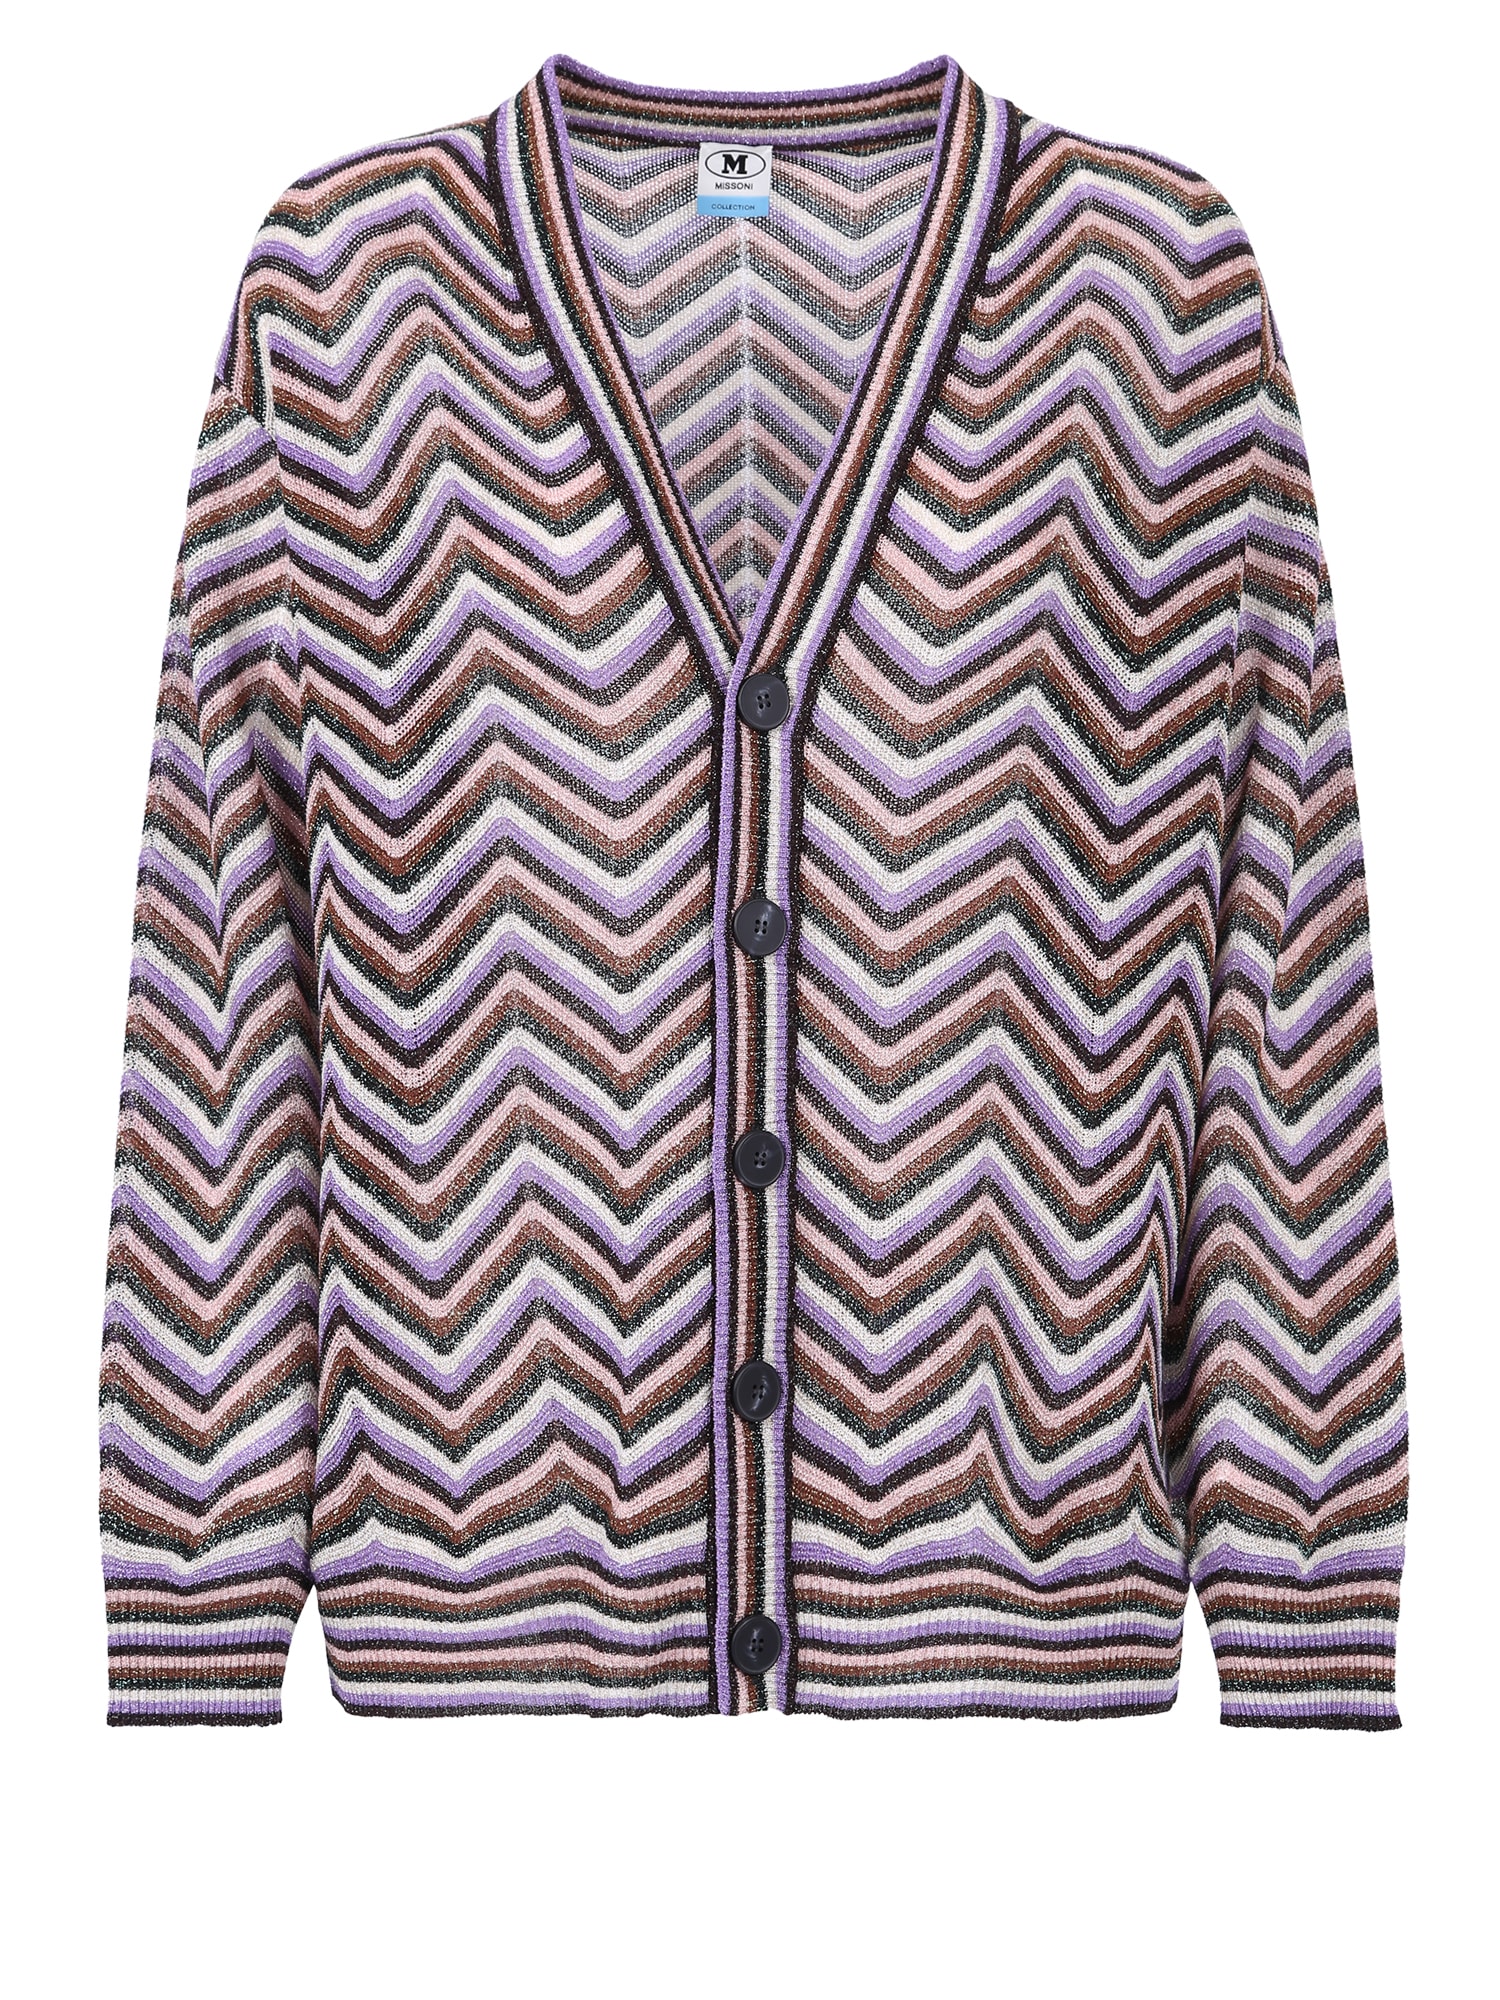 M Missoni Relaxed Fit Cardigan